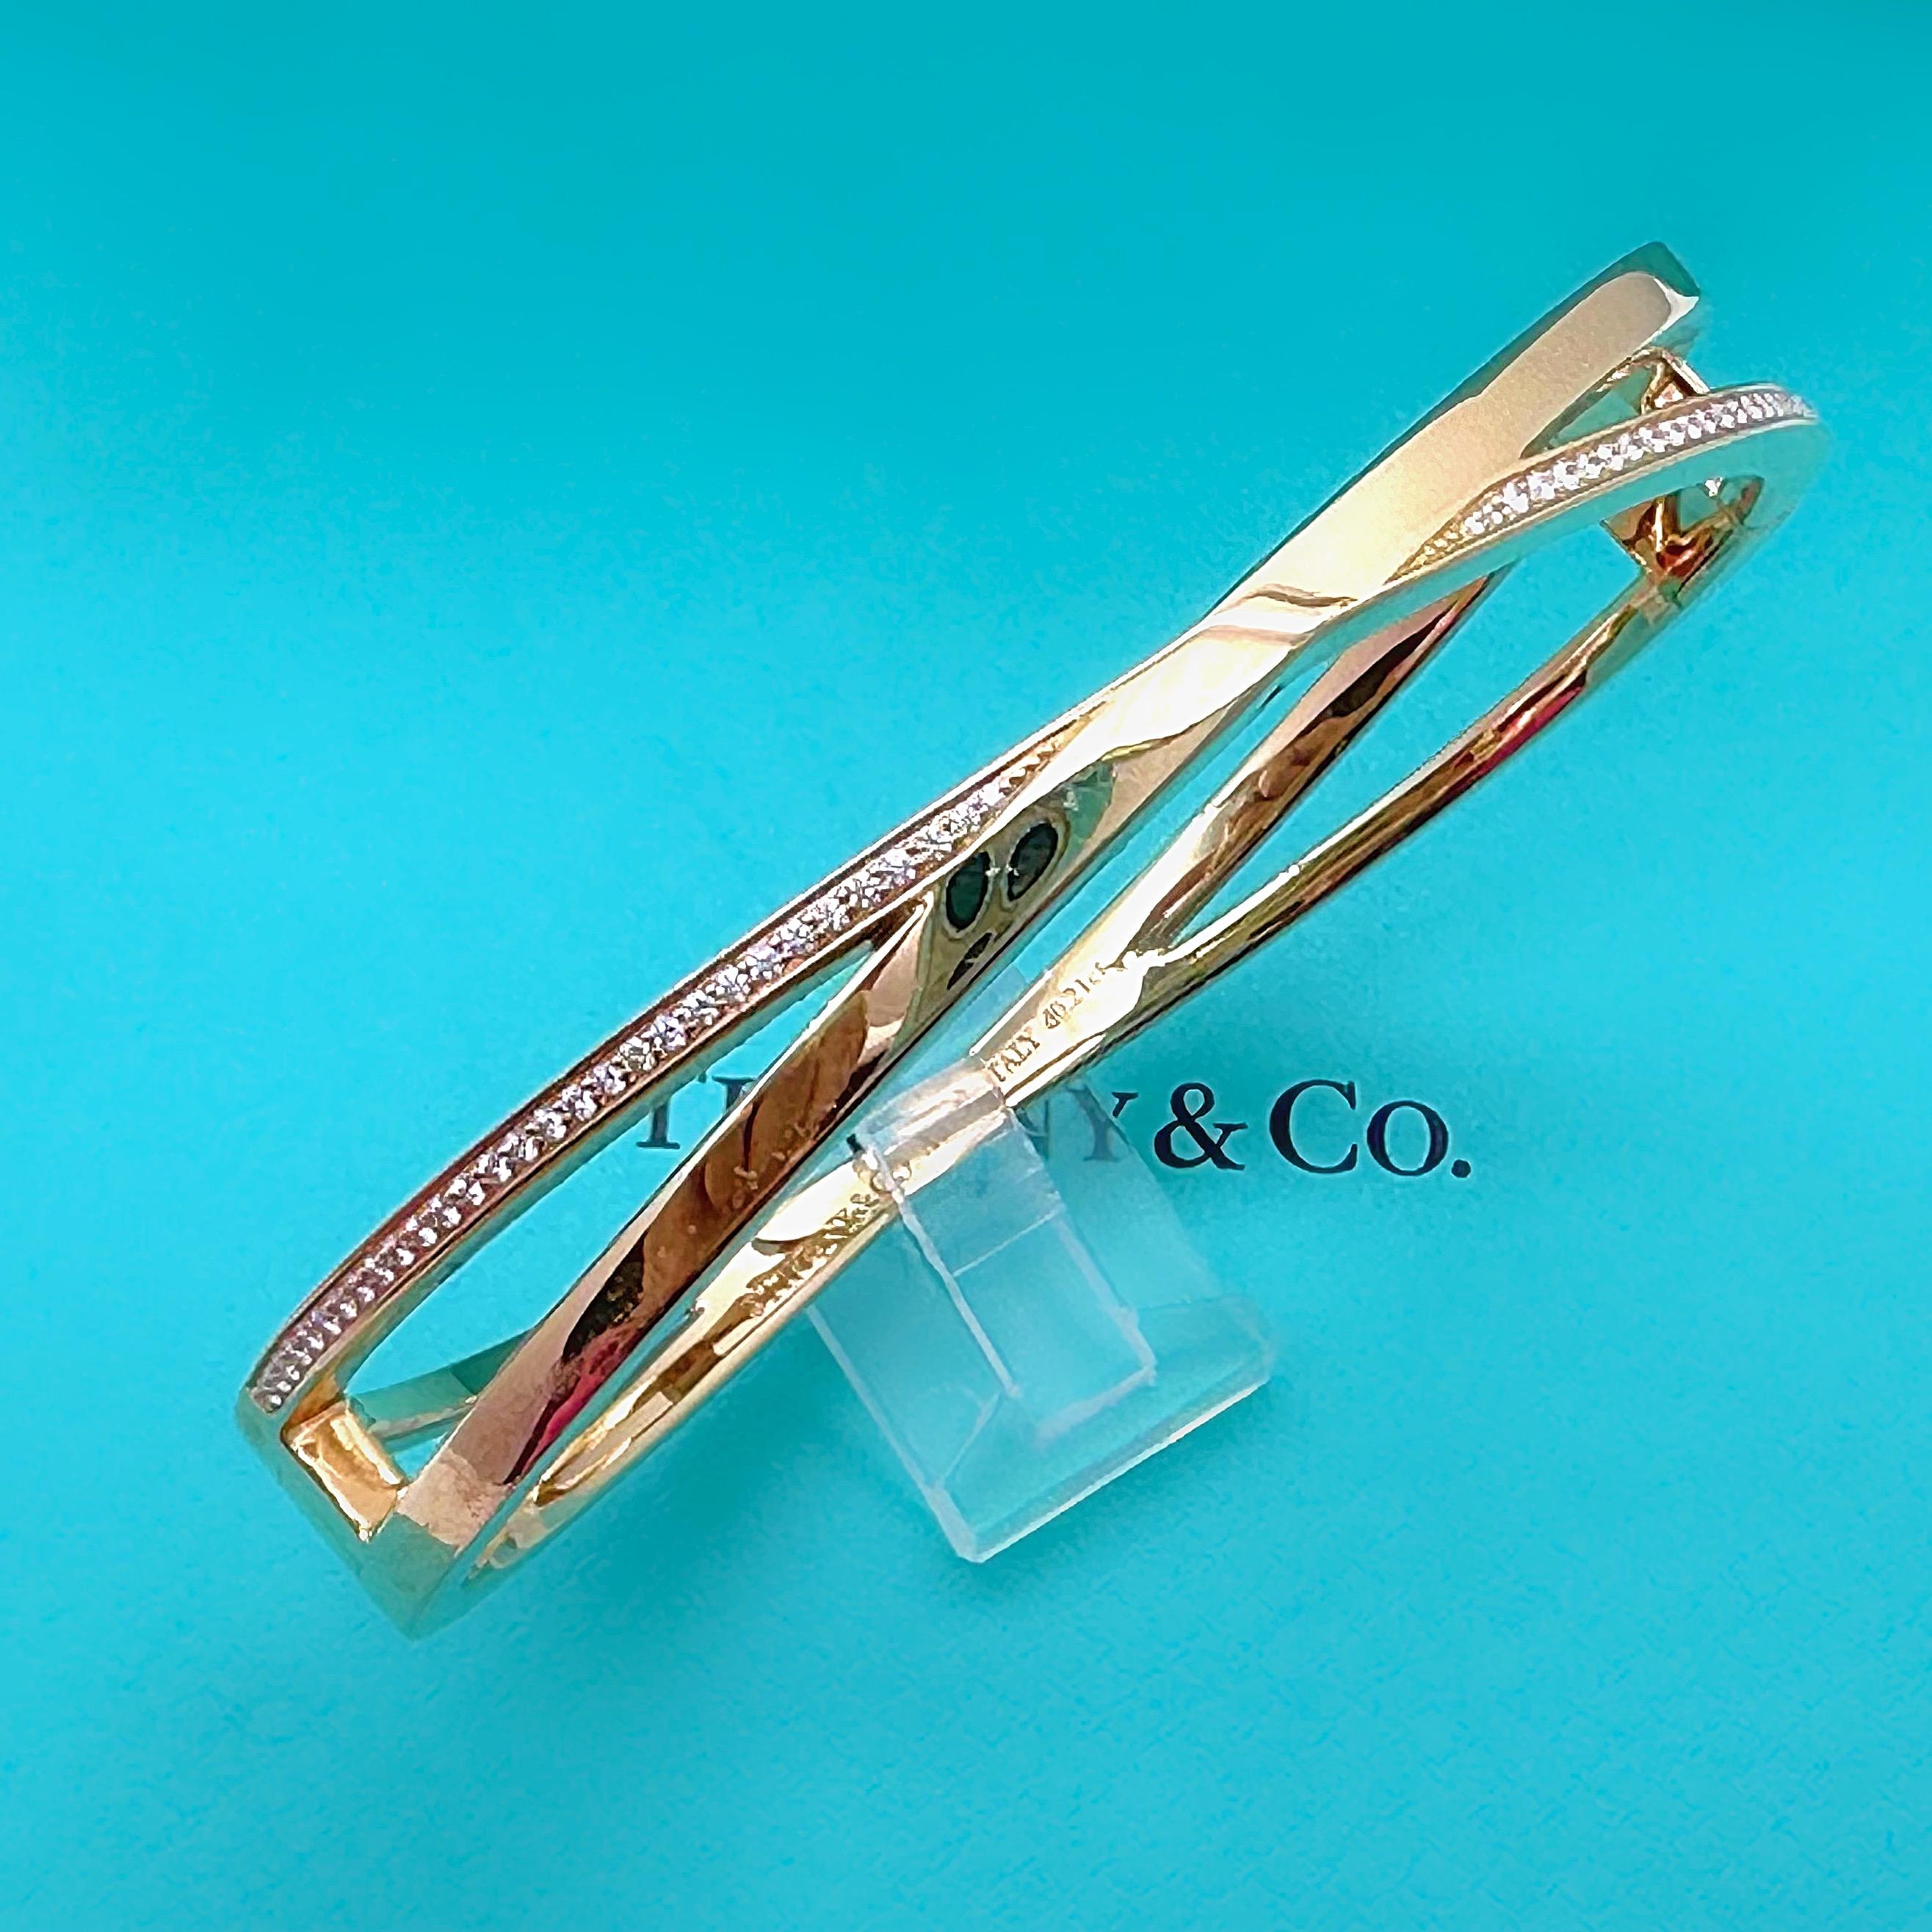 Tiffany & Co. X Narrow Hinged Bangle in 18kt Rose Gold with Diamonds SZ MED For Sale 2